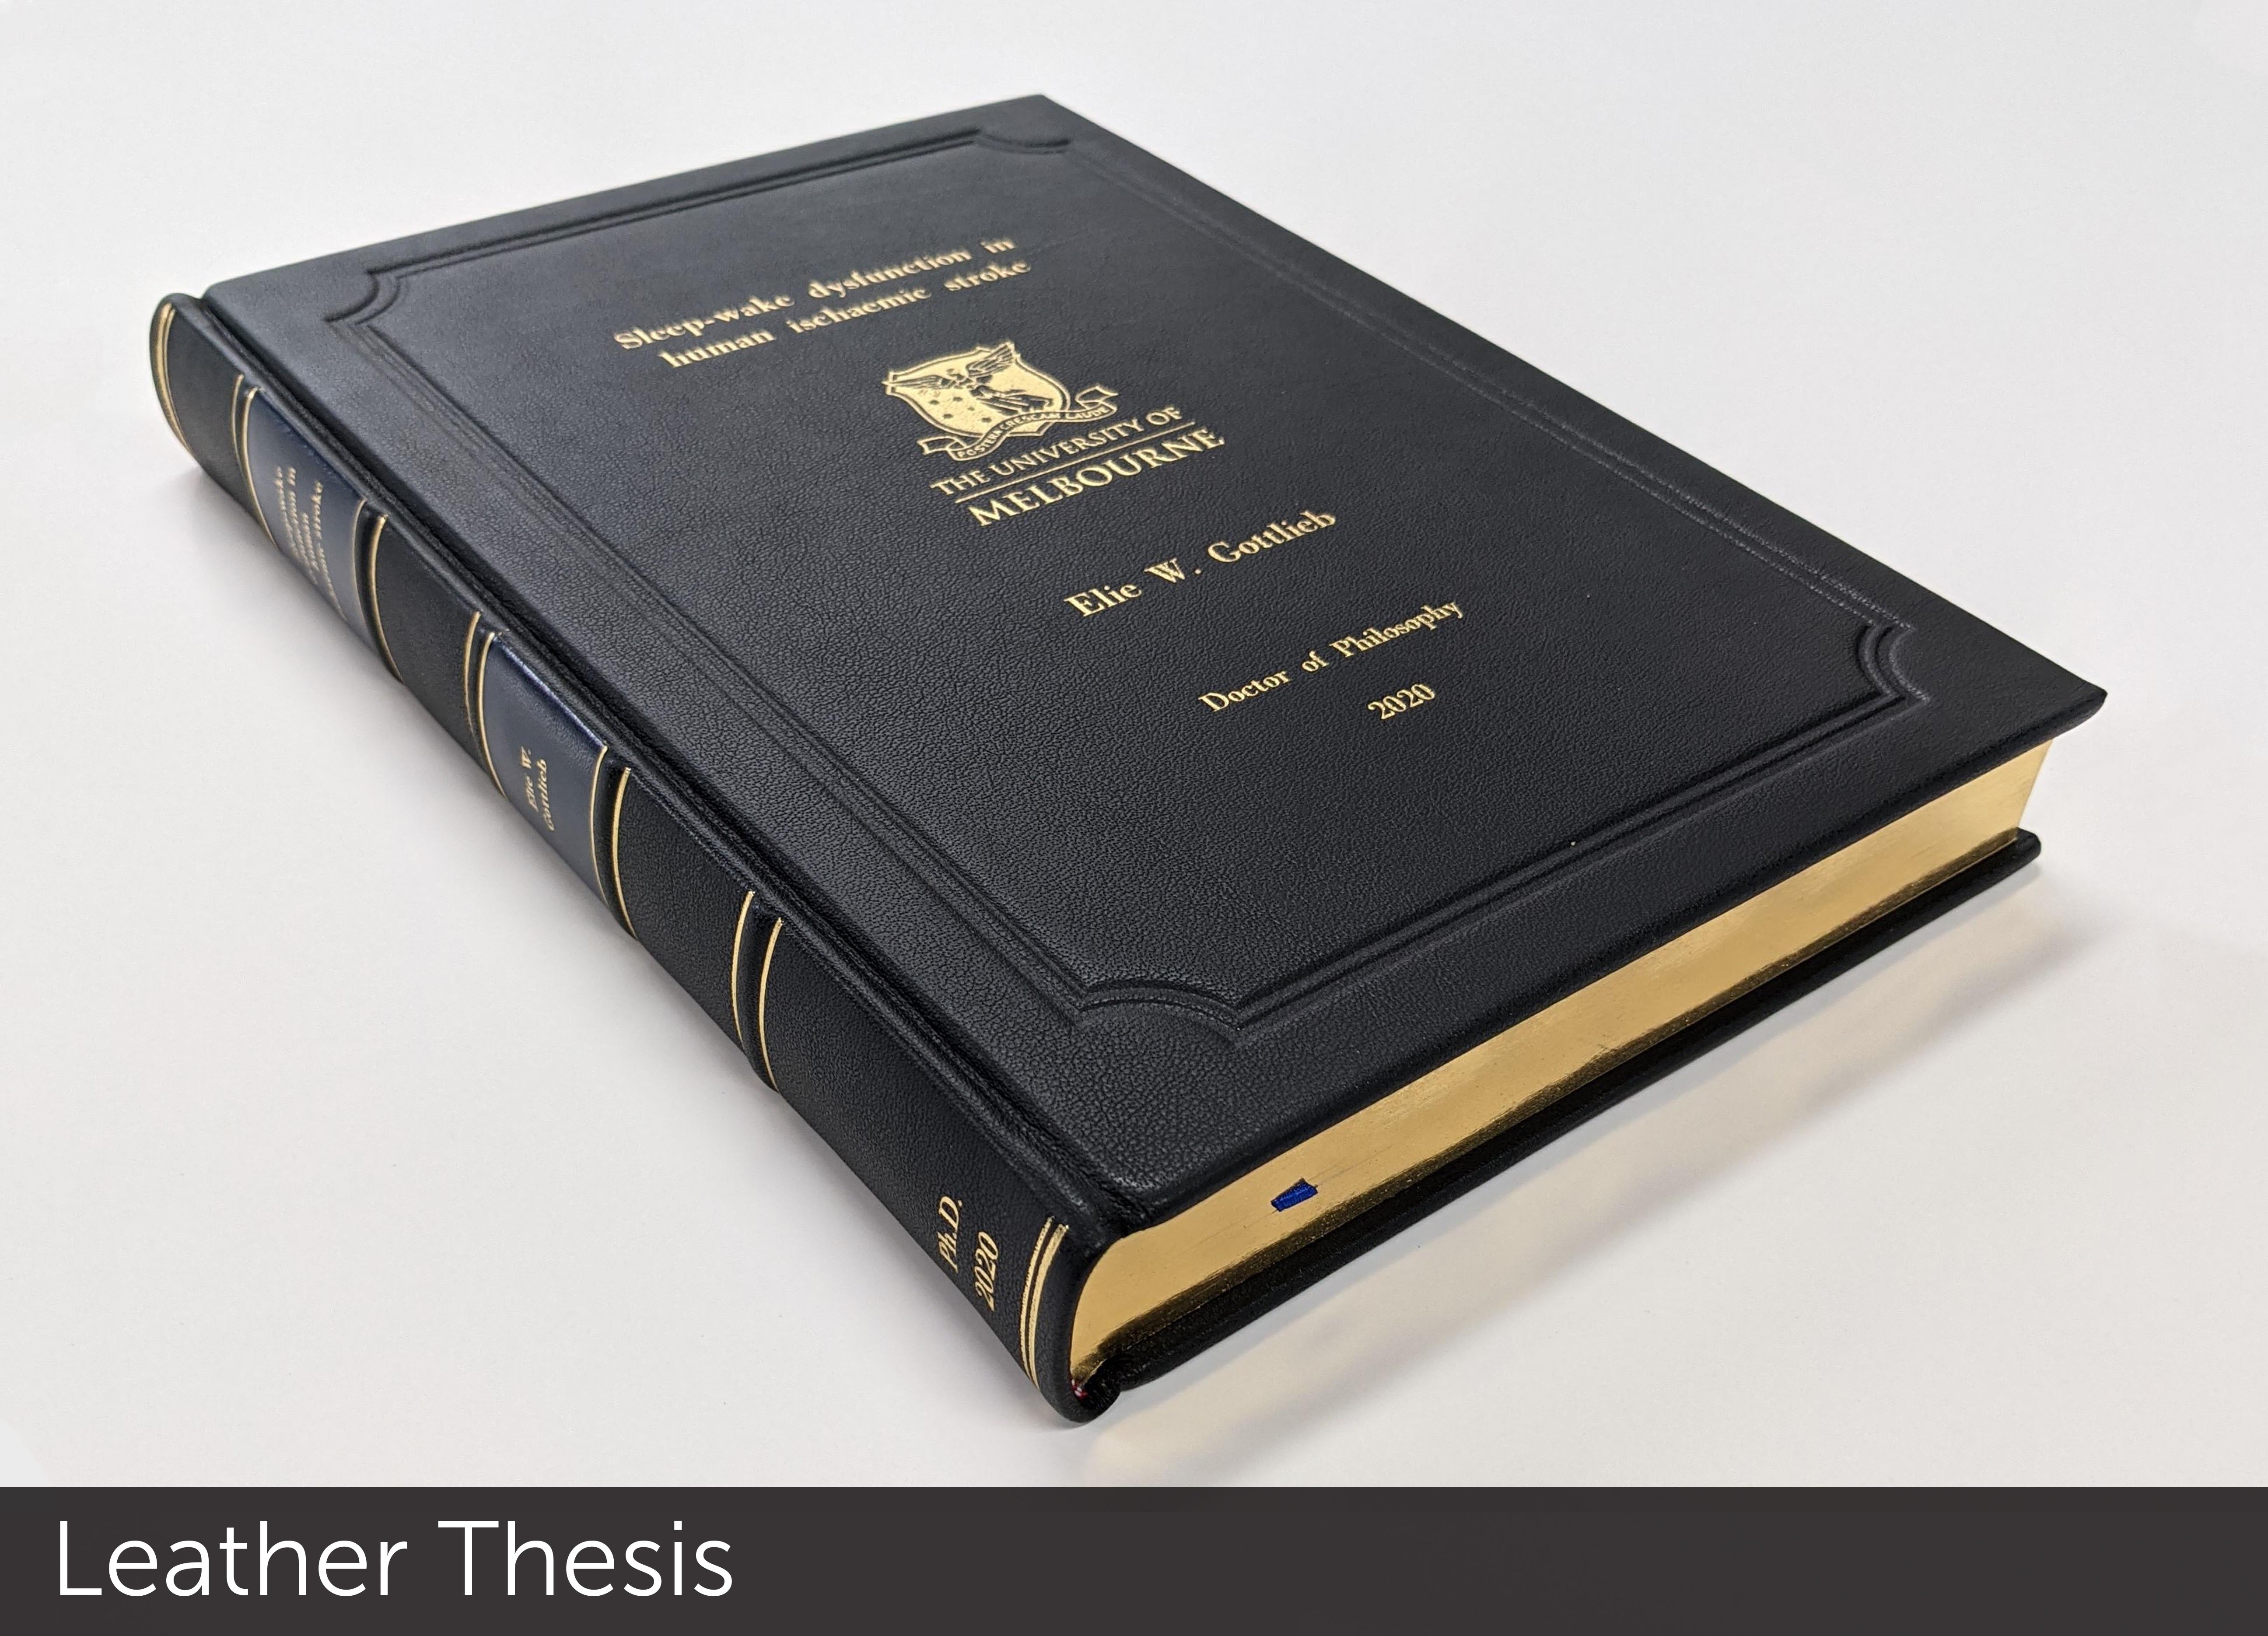 Phd thesis in business law